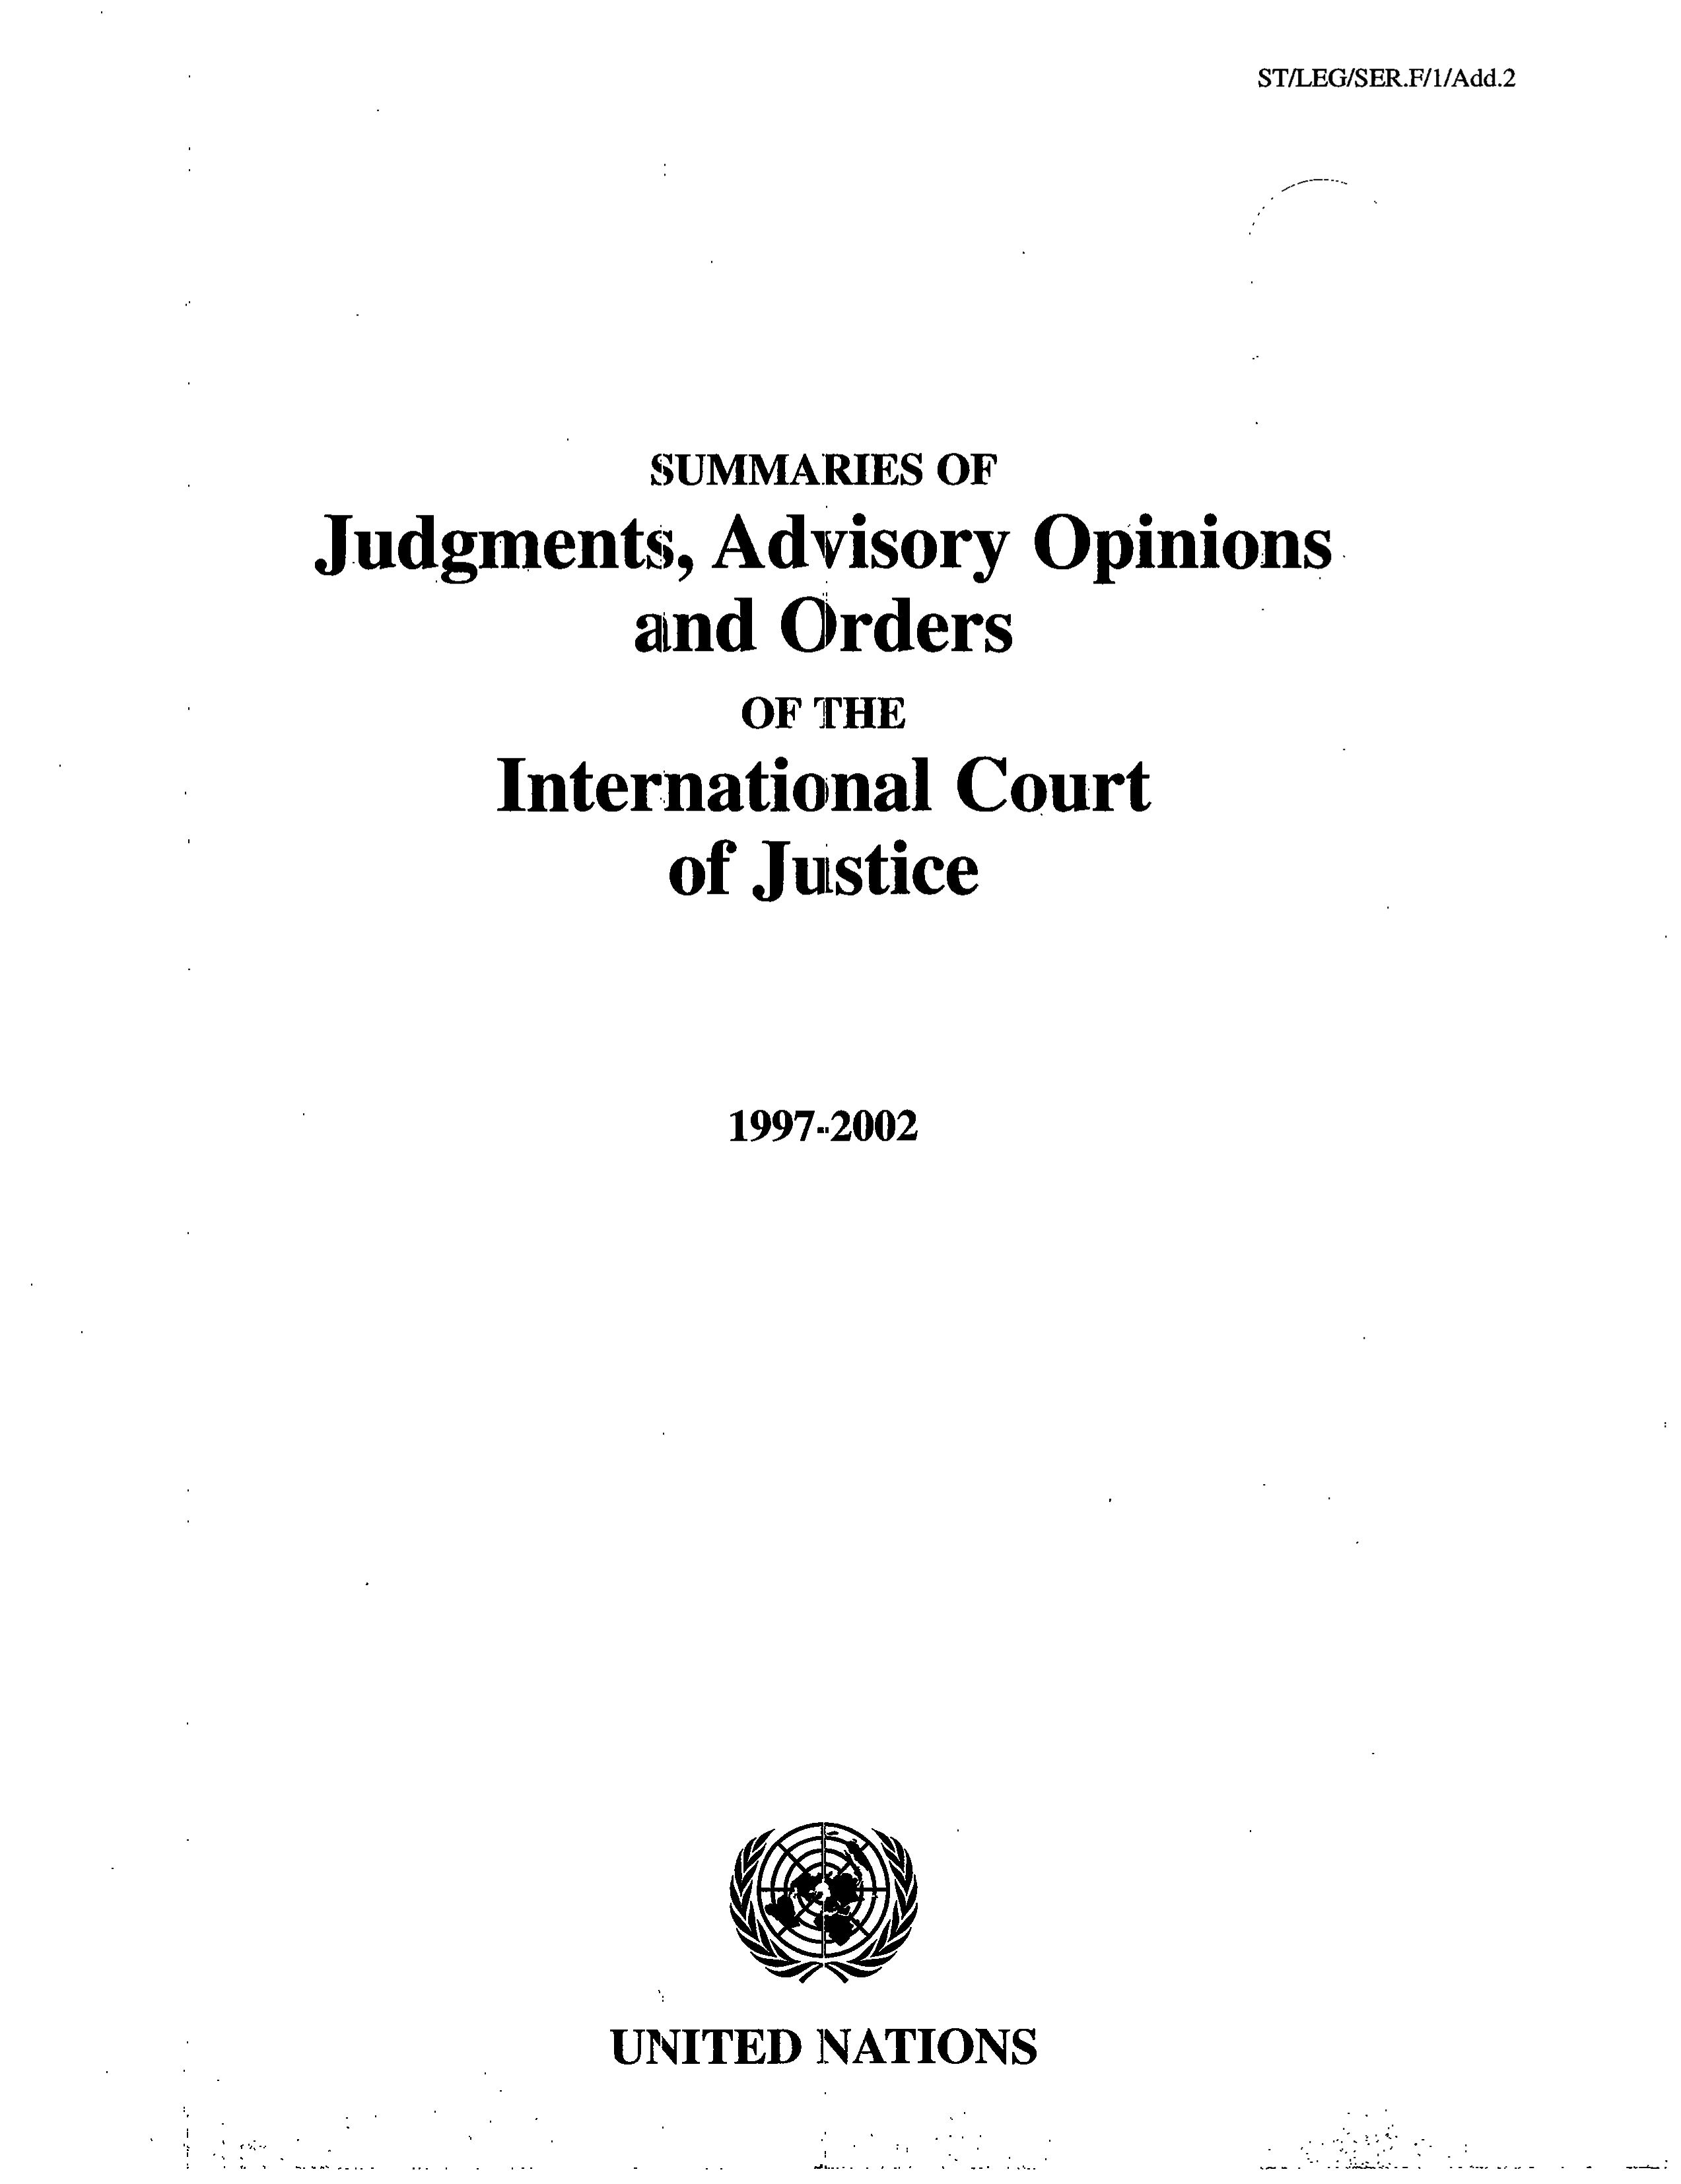 image of Summaries of Judgments, Advisory Opinions and Orders of the International Court of Justice 1997-2002